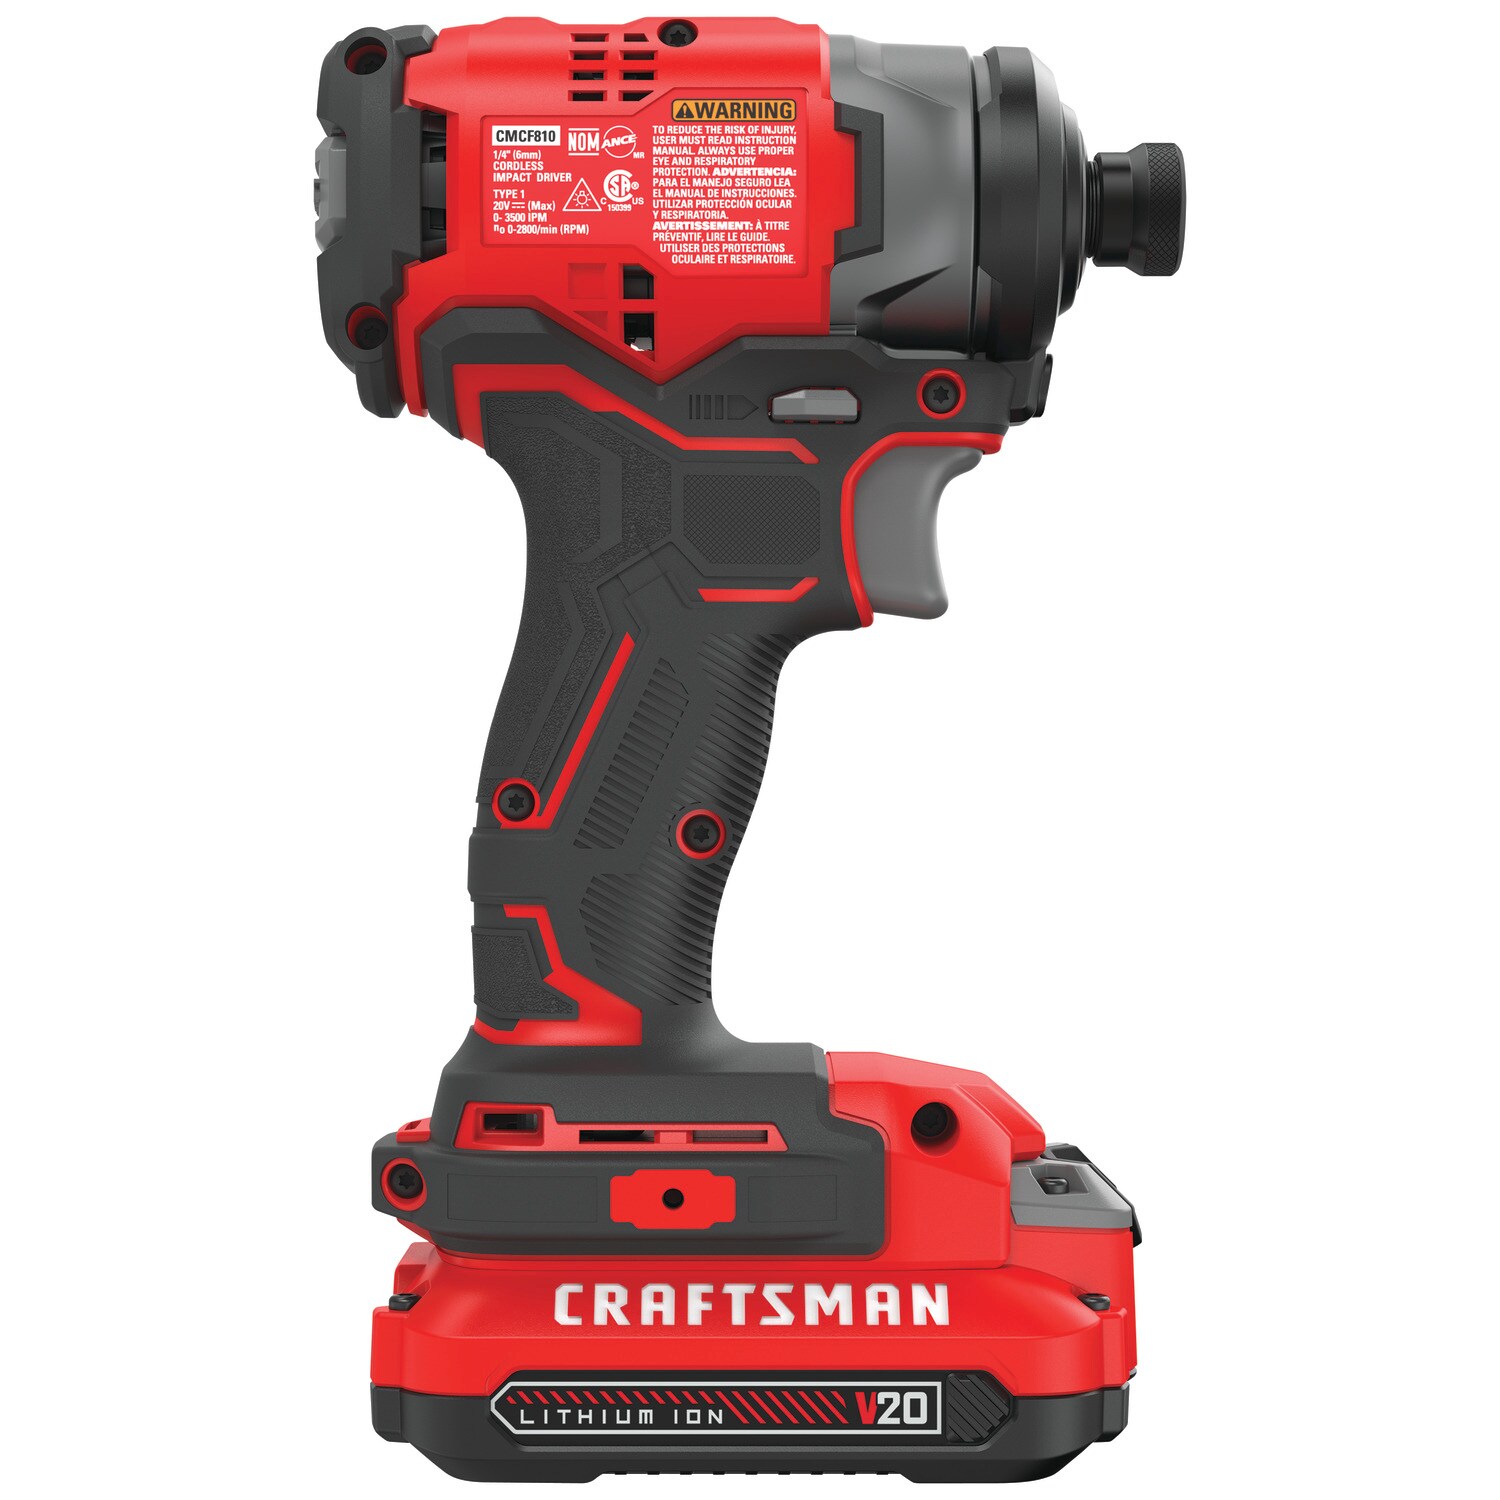 CRAFTSMAN V20 20-volt Max Variable Speed Brushless Cordless Impact Driver (1-Battery Included)